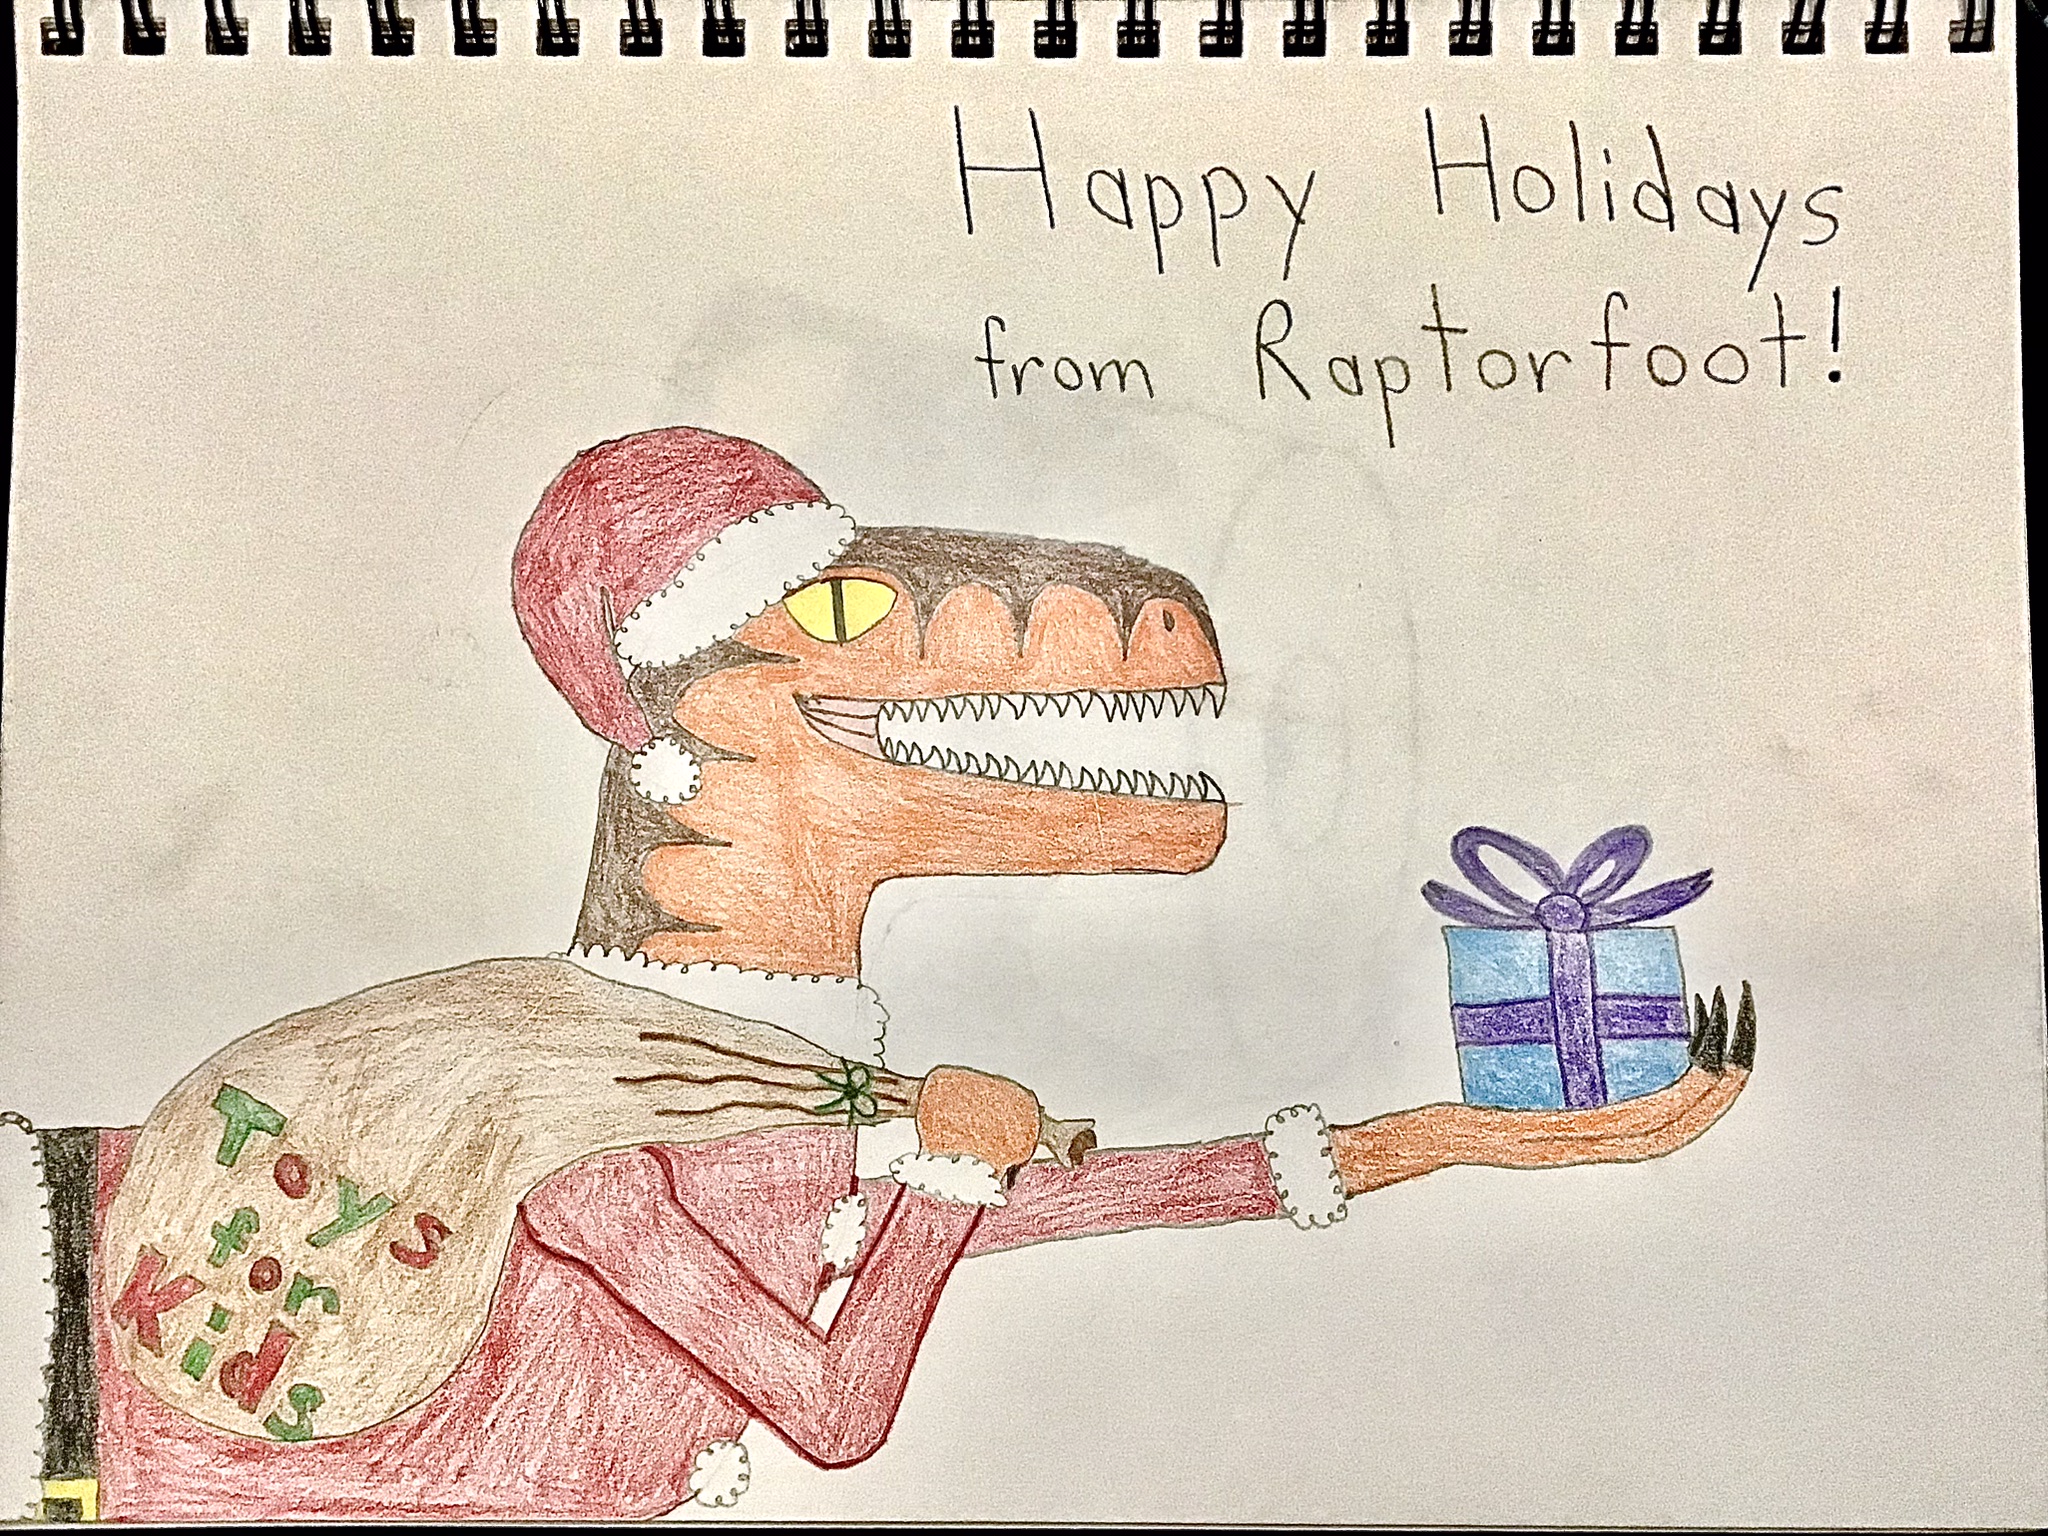 Raptorfoot the Giftgiver